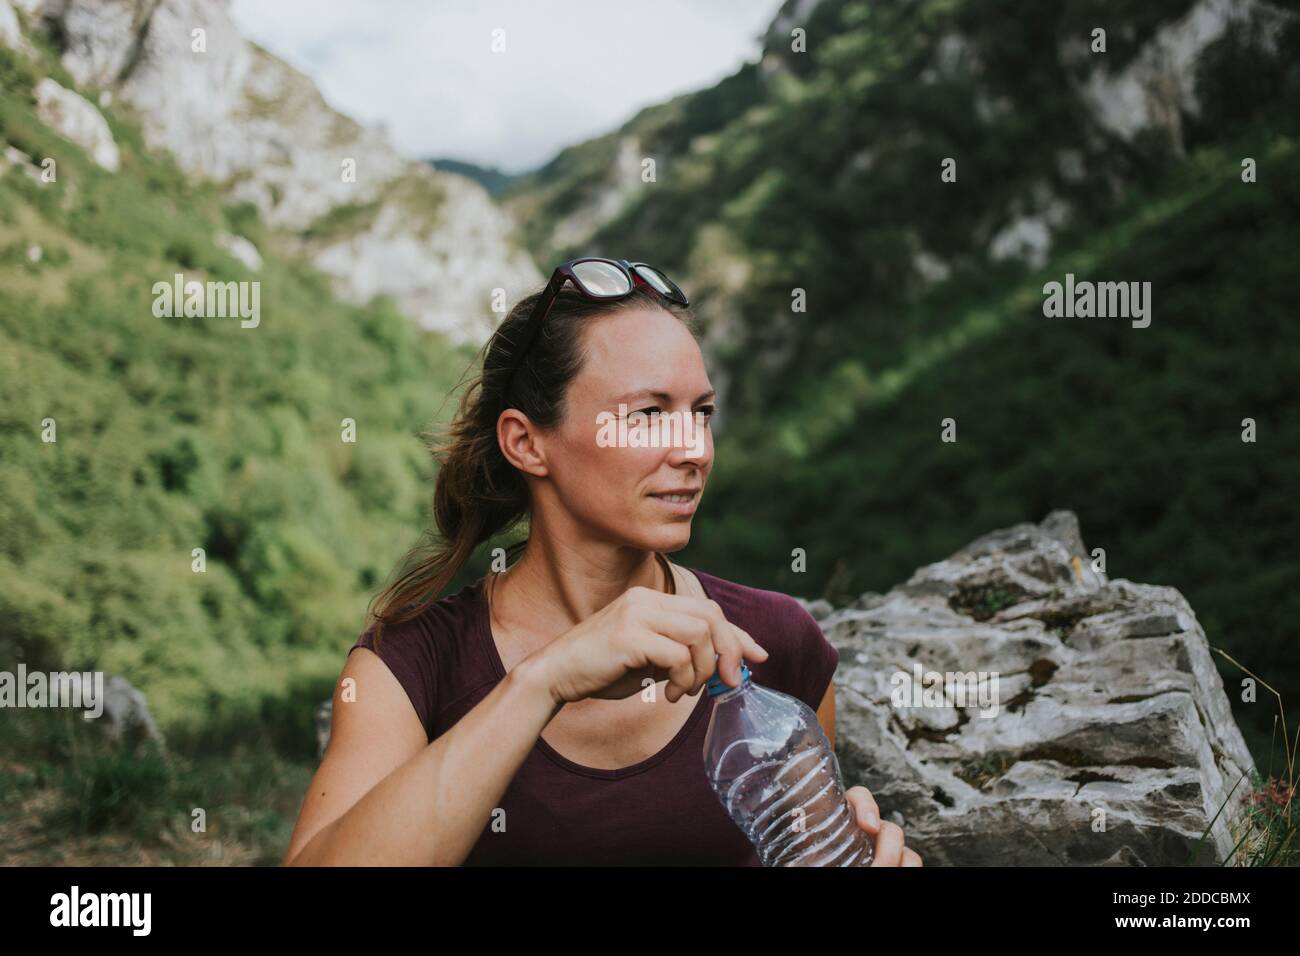 Mid adult female trekker holding water bottle while looking away Stock Photo